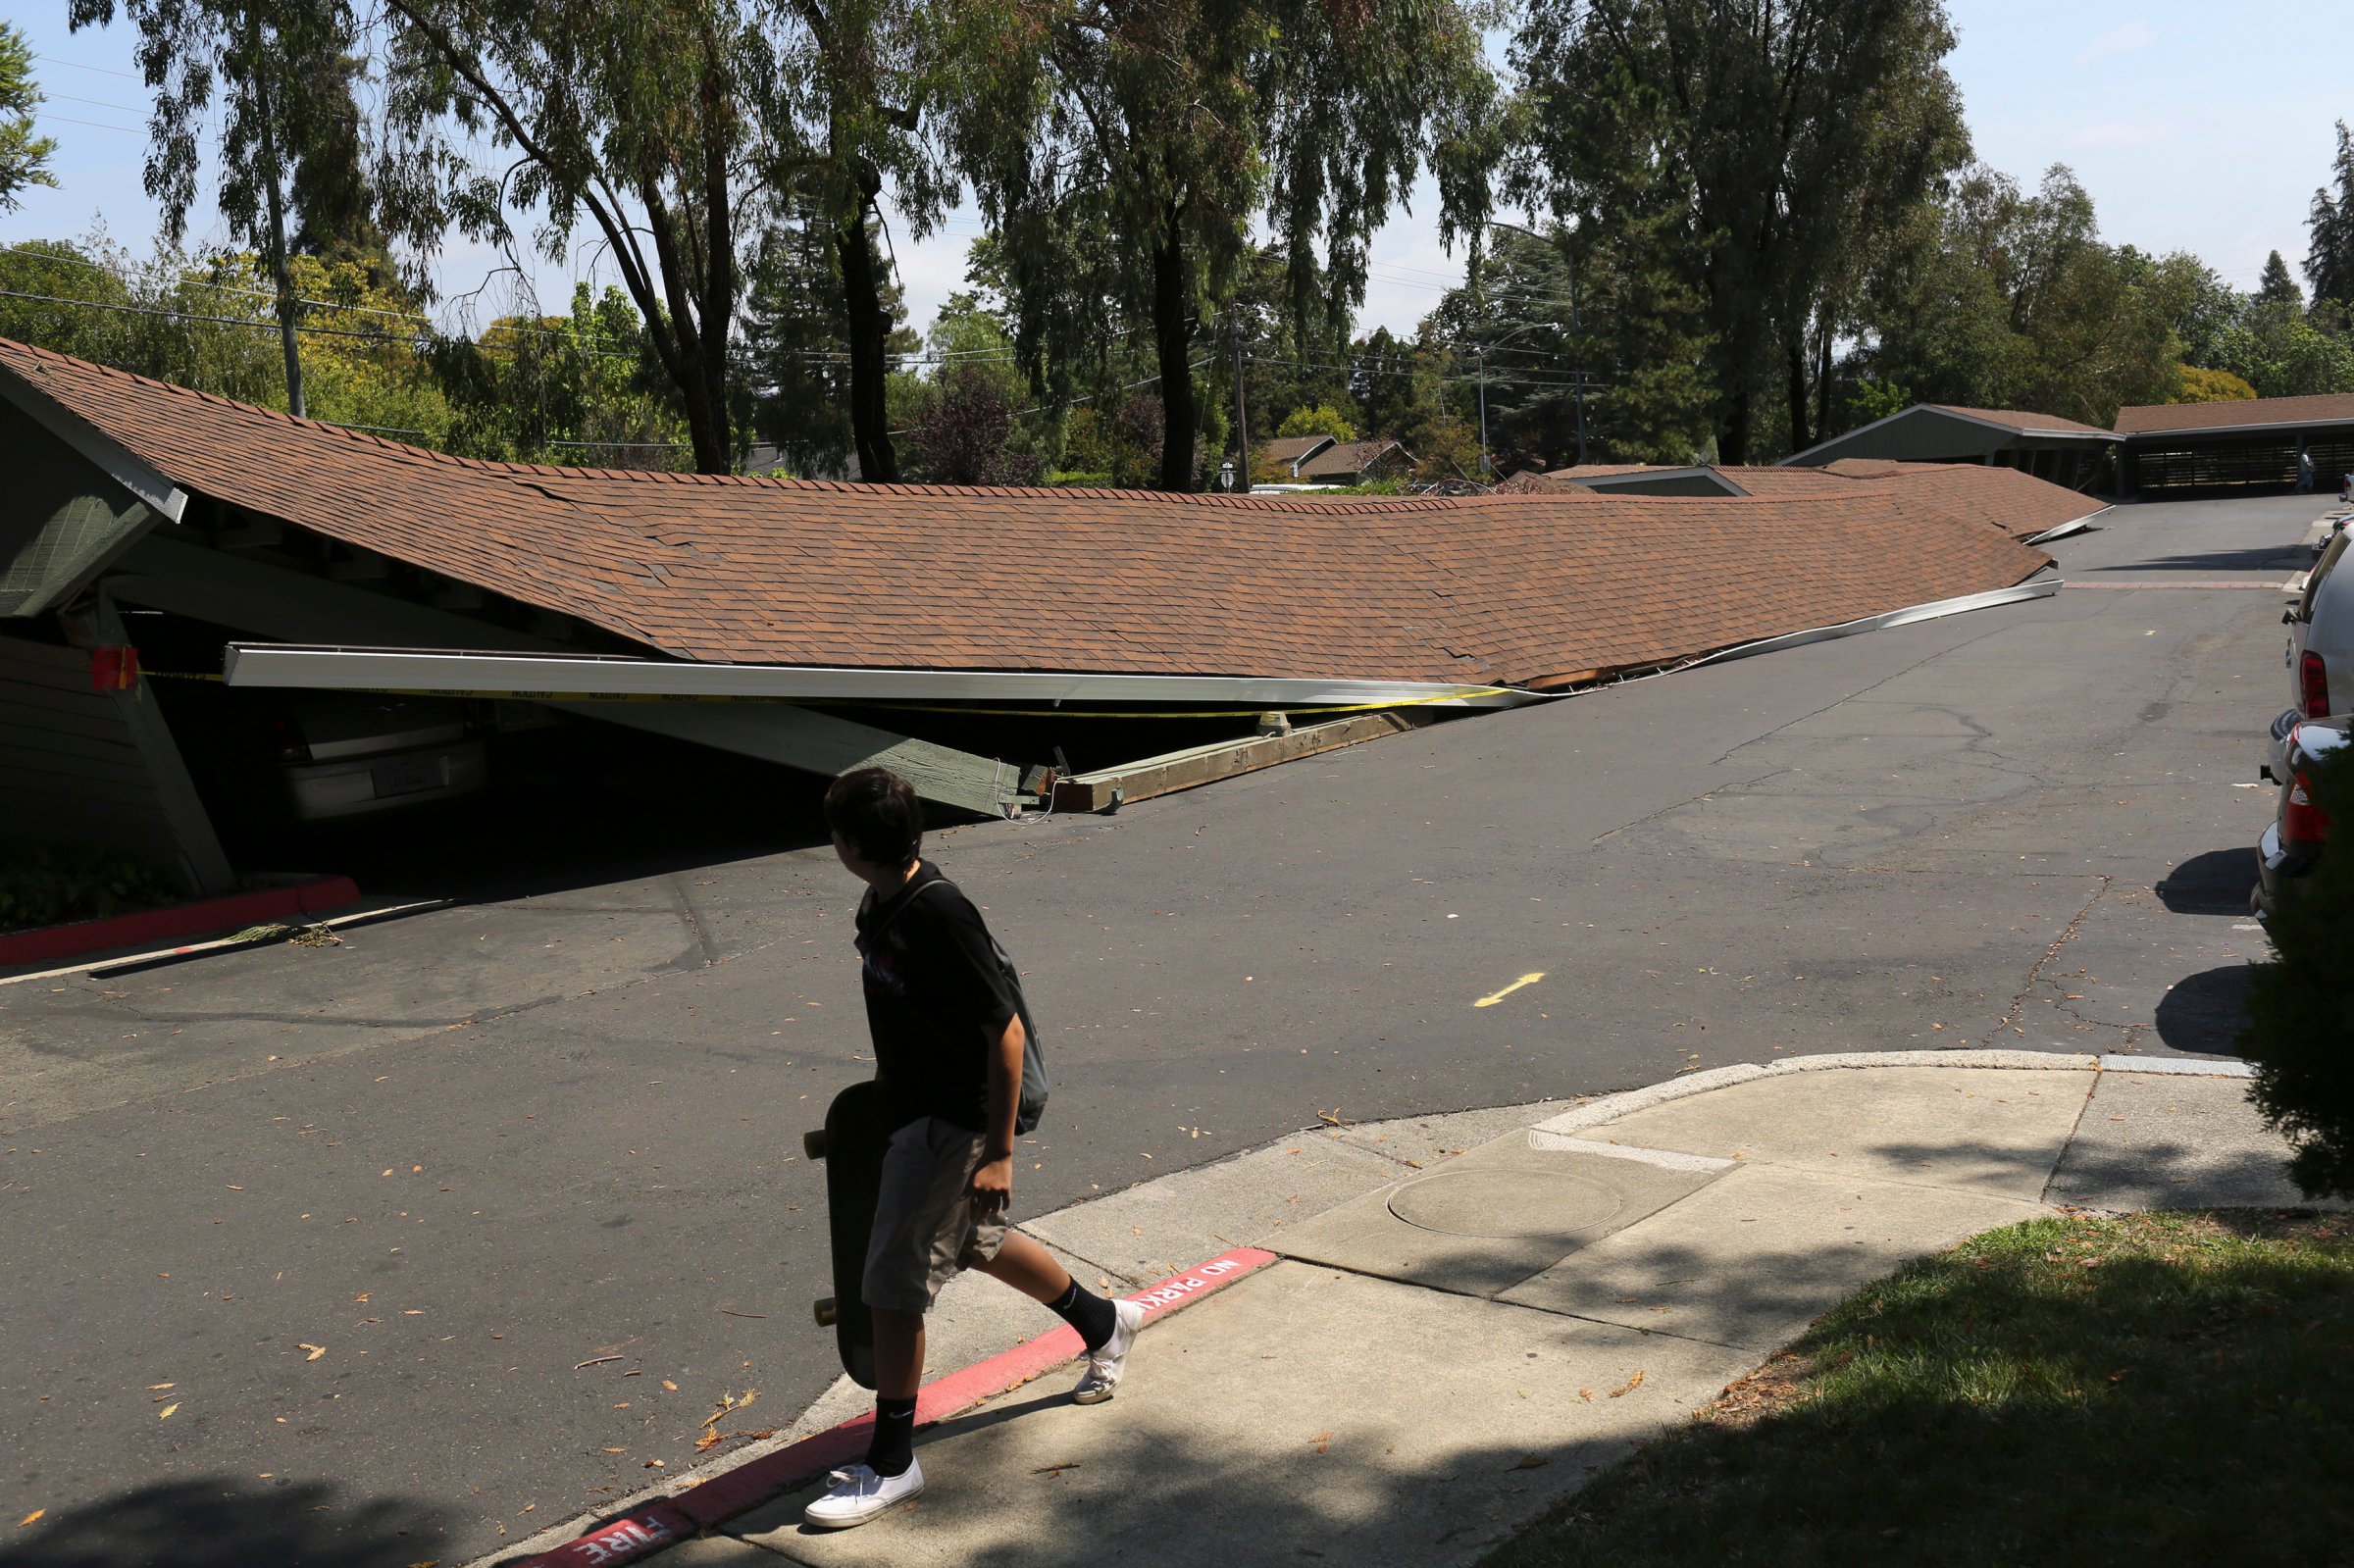 A youngster walks past a parking structure that collapsed during Sunday's 6.0 earthquake in Napa, California August 25, 2014